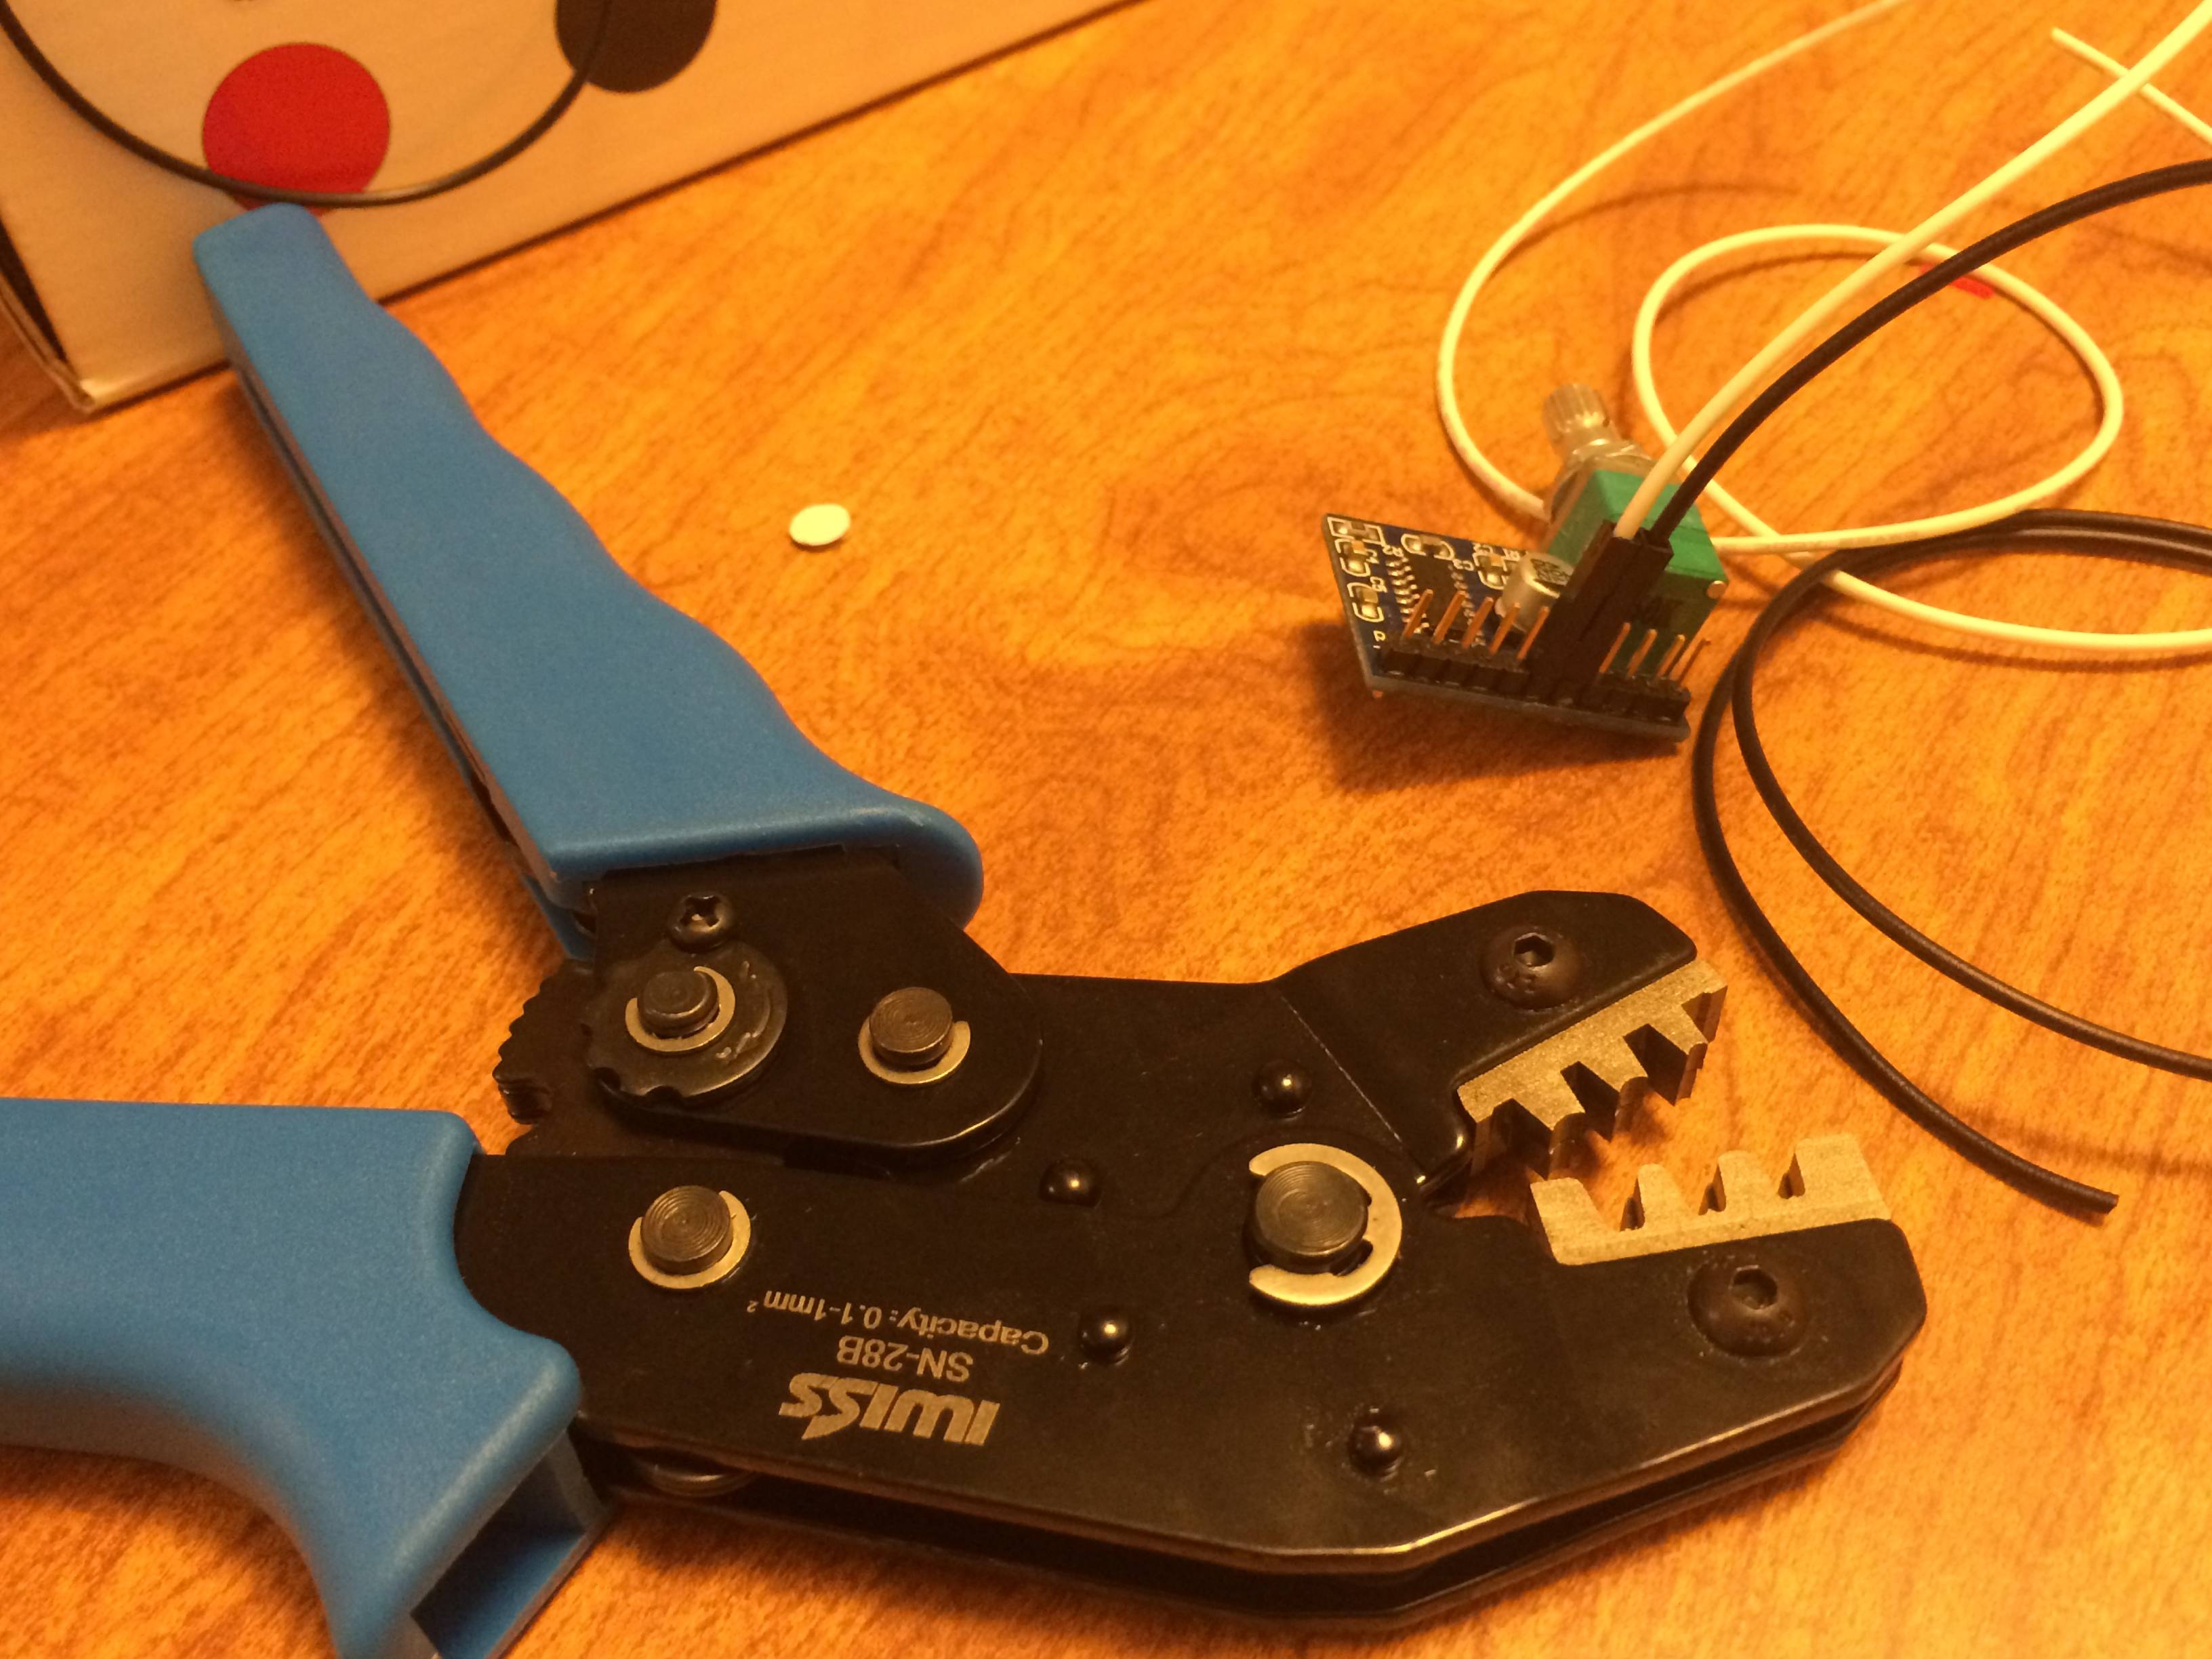 Here is my wire crimper I had to get and my tiny little audio amp.